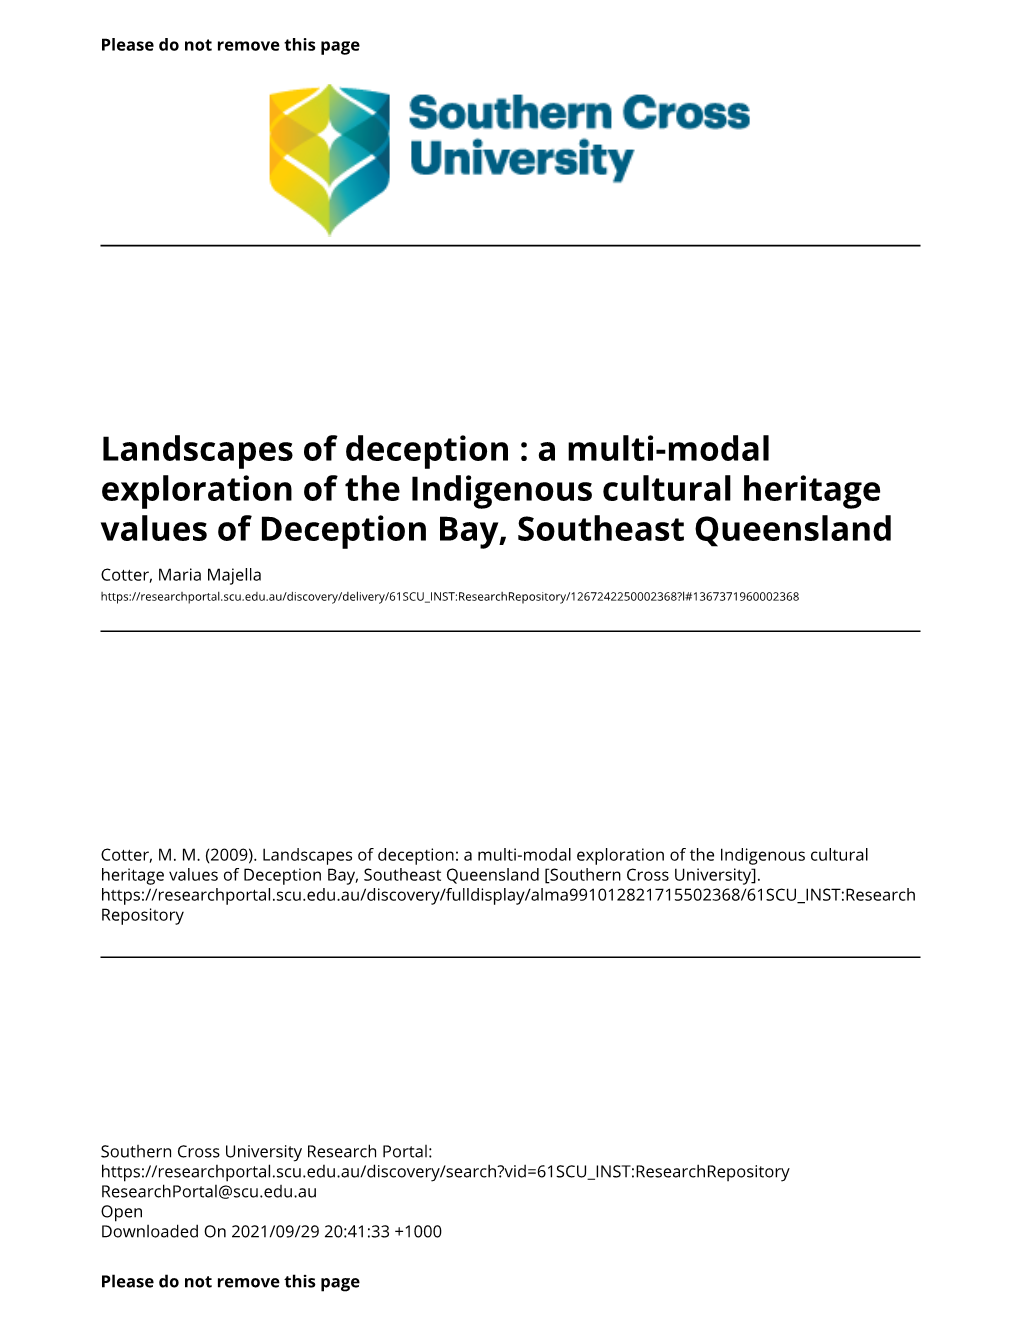 A Multi-Modal Exploration of the Indigenous Cultural Heritage Values of Deception Bay, Southeast Queensland